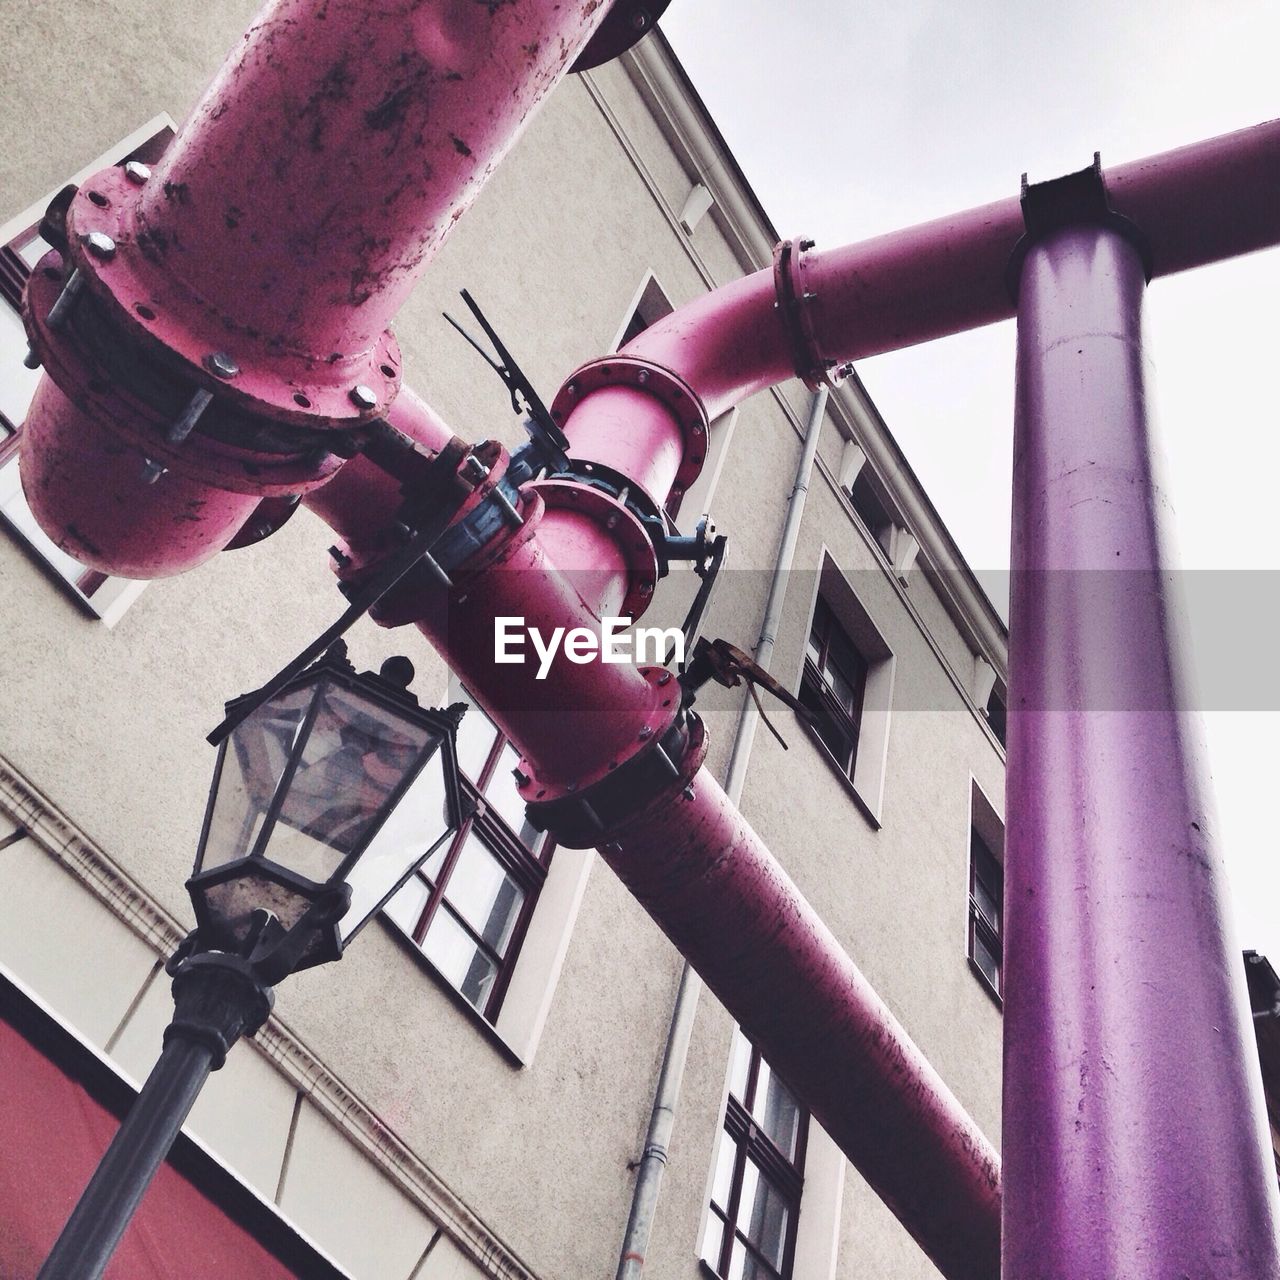 Pink pipes outside a residential building